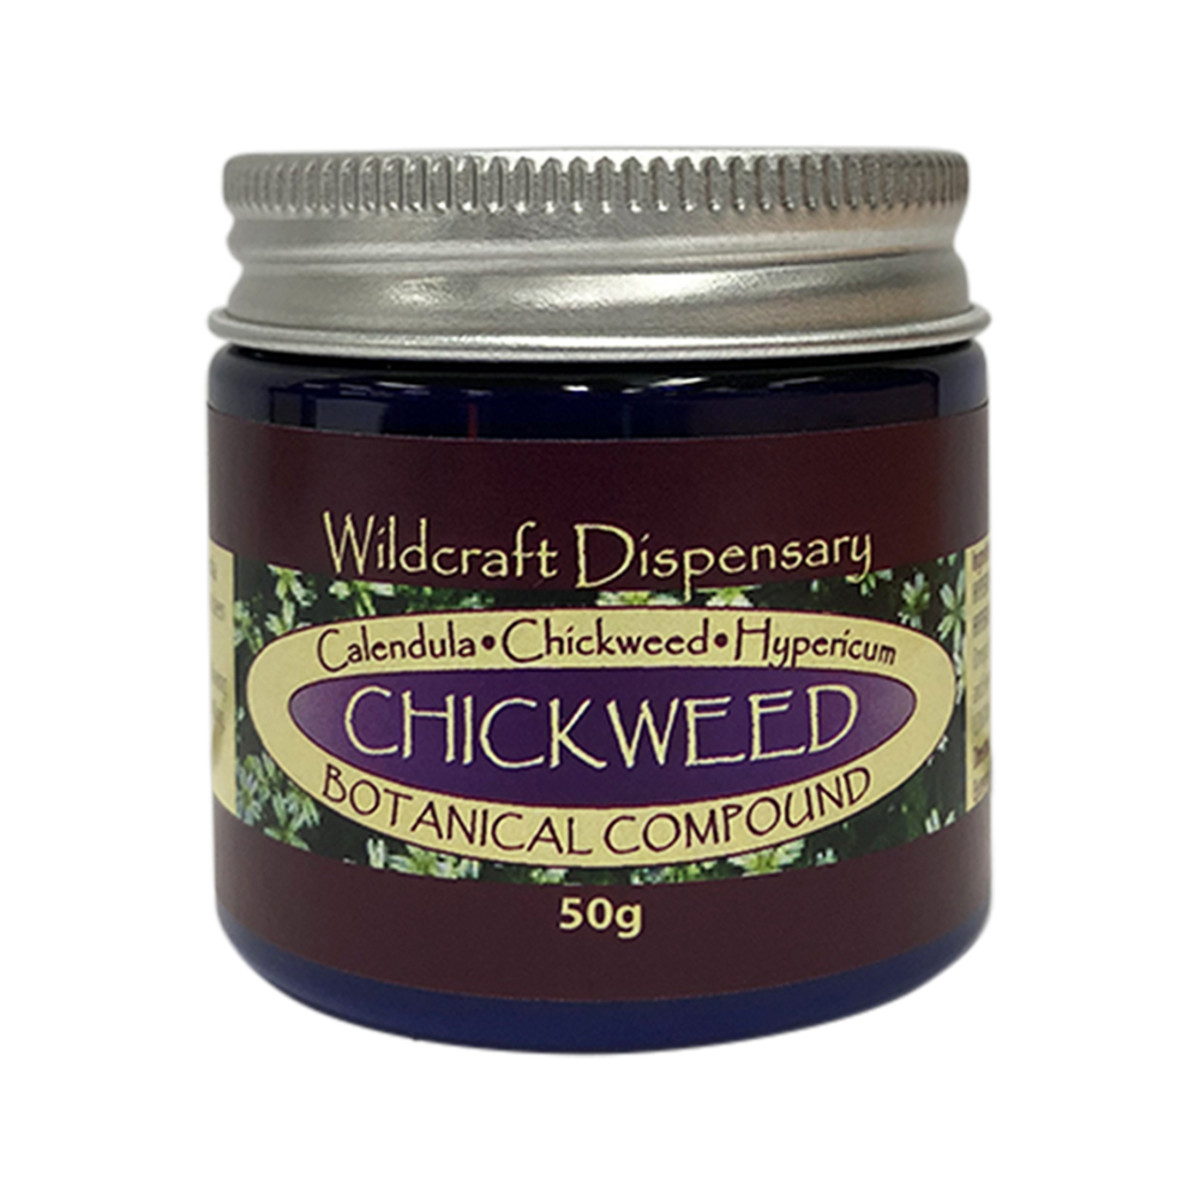 WILDCRAFT DISPENSARY - Chickweed Natural Ointment